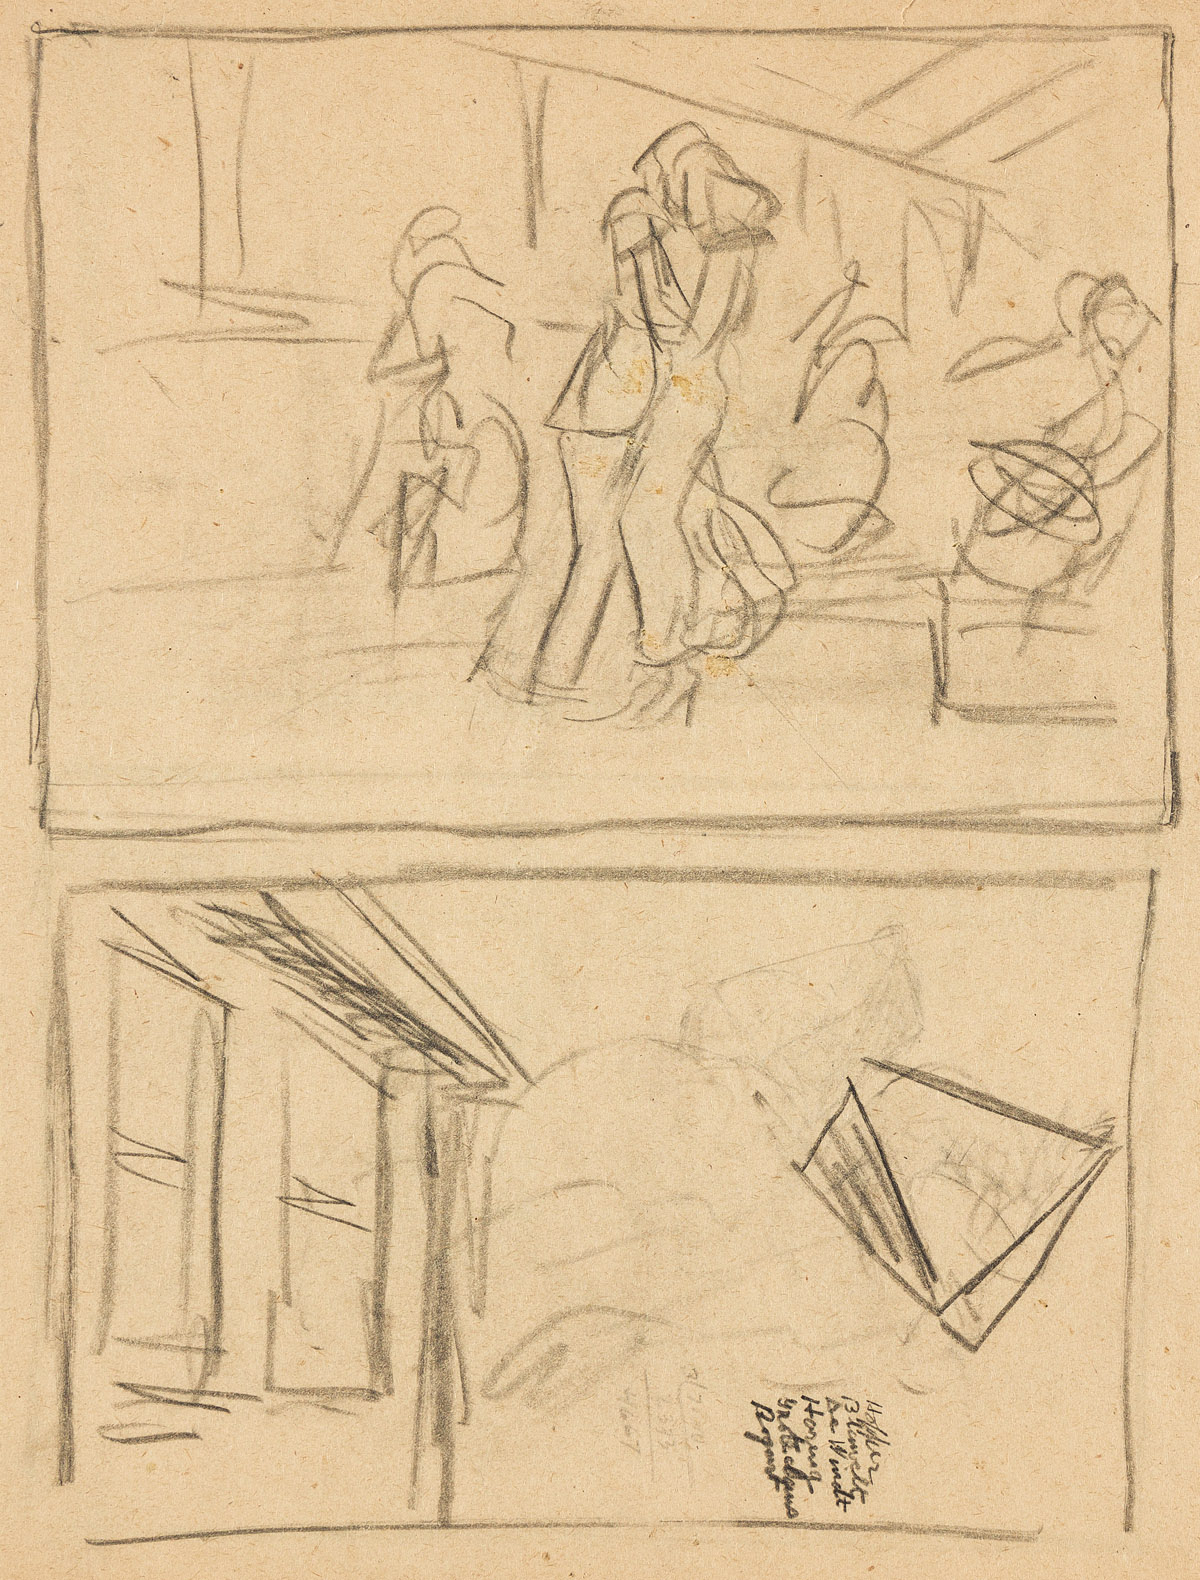 EDWARD HOPPER Figures in an Interior and a House Front * Interior Study and Geometric Study.